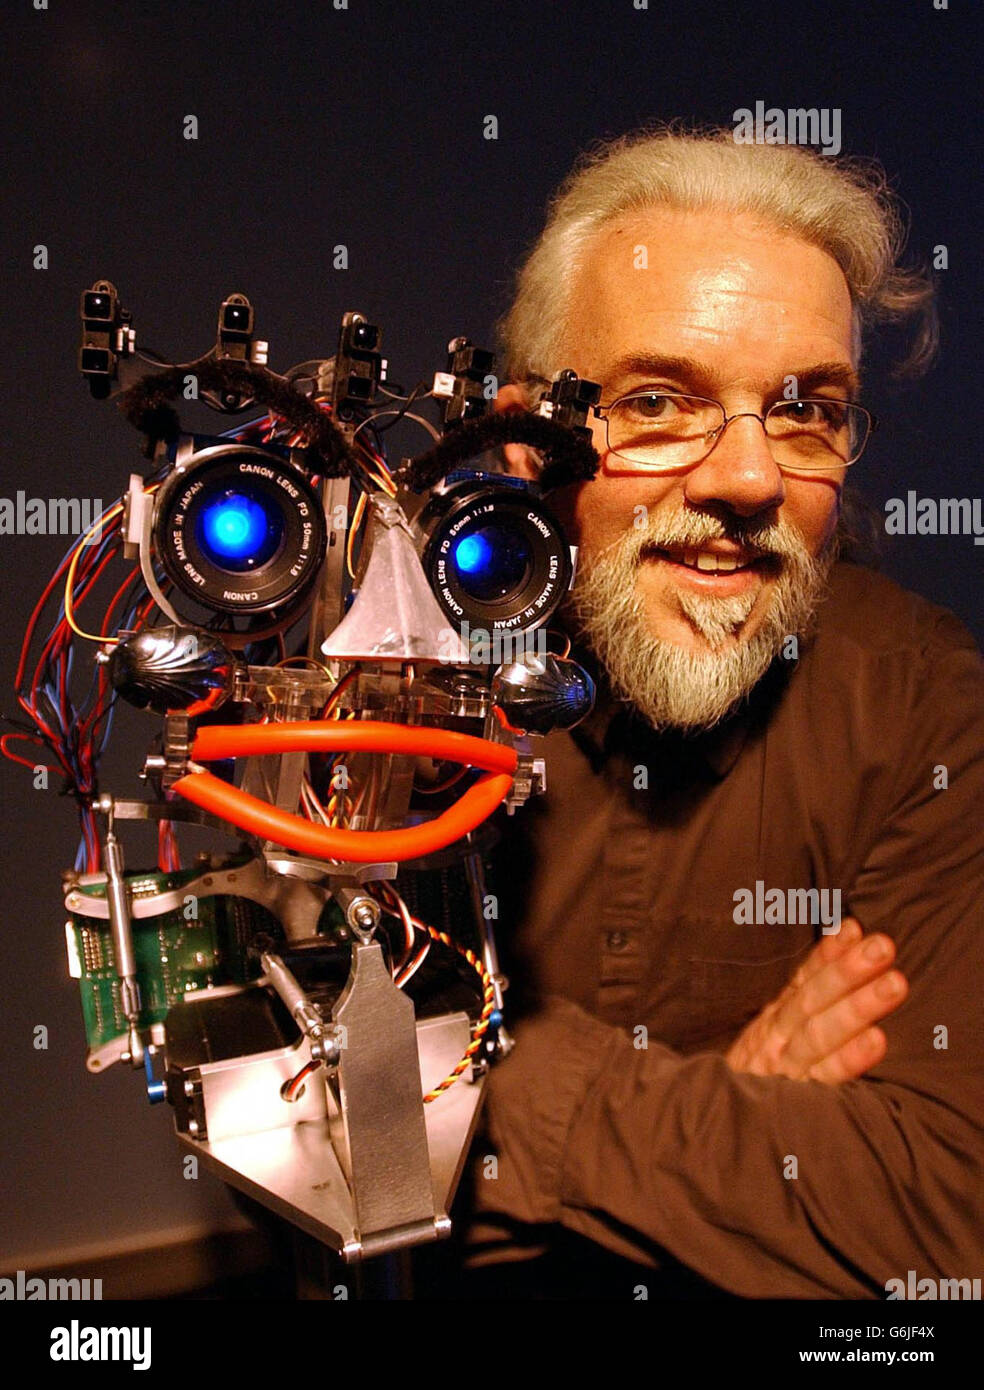 Sheffield University's Professor Noel Sharkey, a world leading robotics expert and judge in TV's 'Robot Wars', with 'eMo' the robot. The robot - which goes on show at the 'Think Tank' at Birmingham's Science Museum on the October 25, 2003 - was developed by Prof. Sharkey to show a range of emotions. The robot is part of research to help scientists understand how people attribute emotions (the final frontier in robot evolution) to machines. Stock Photo